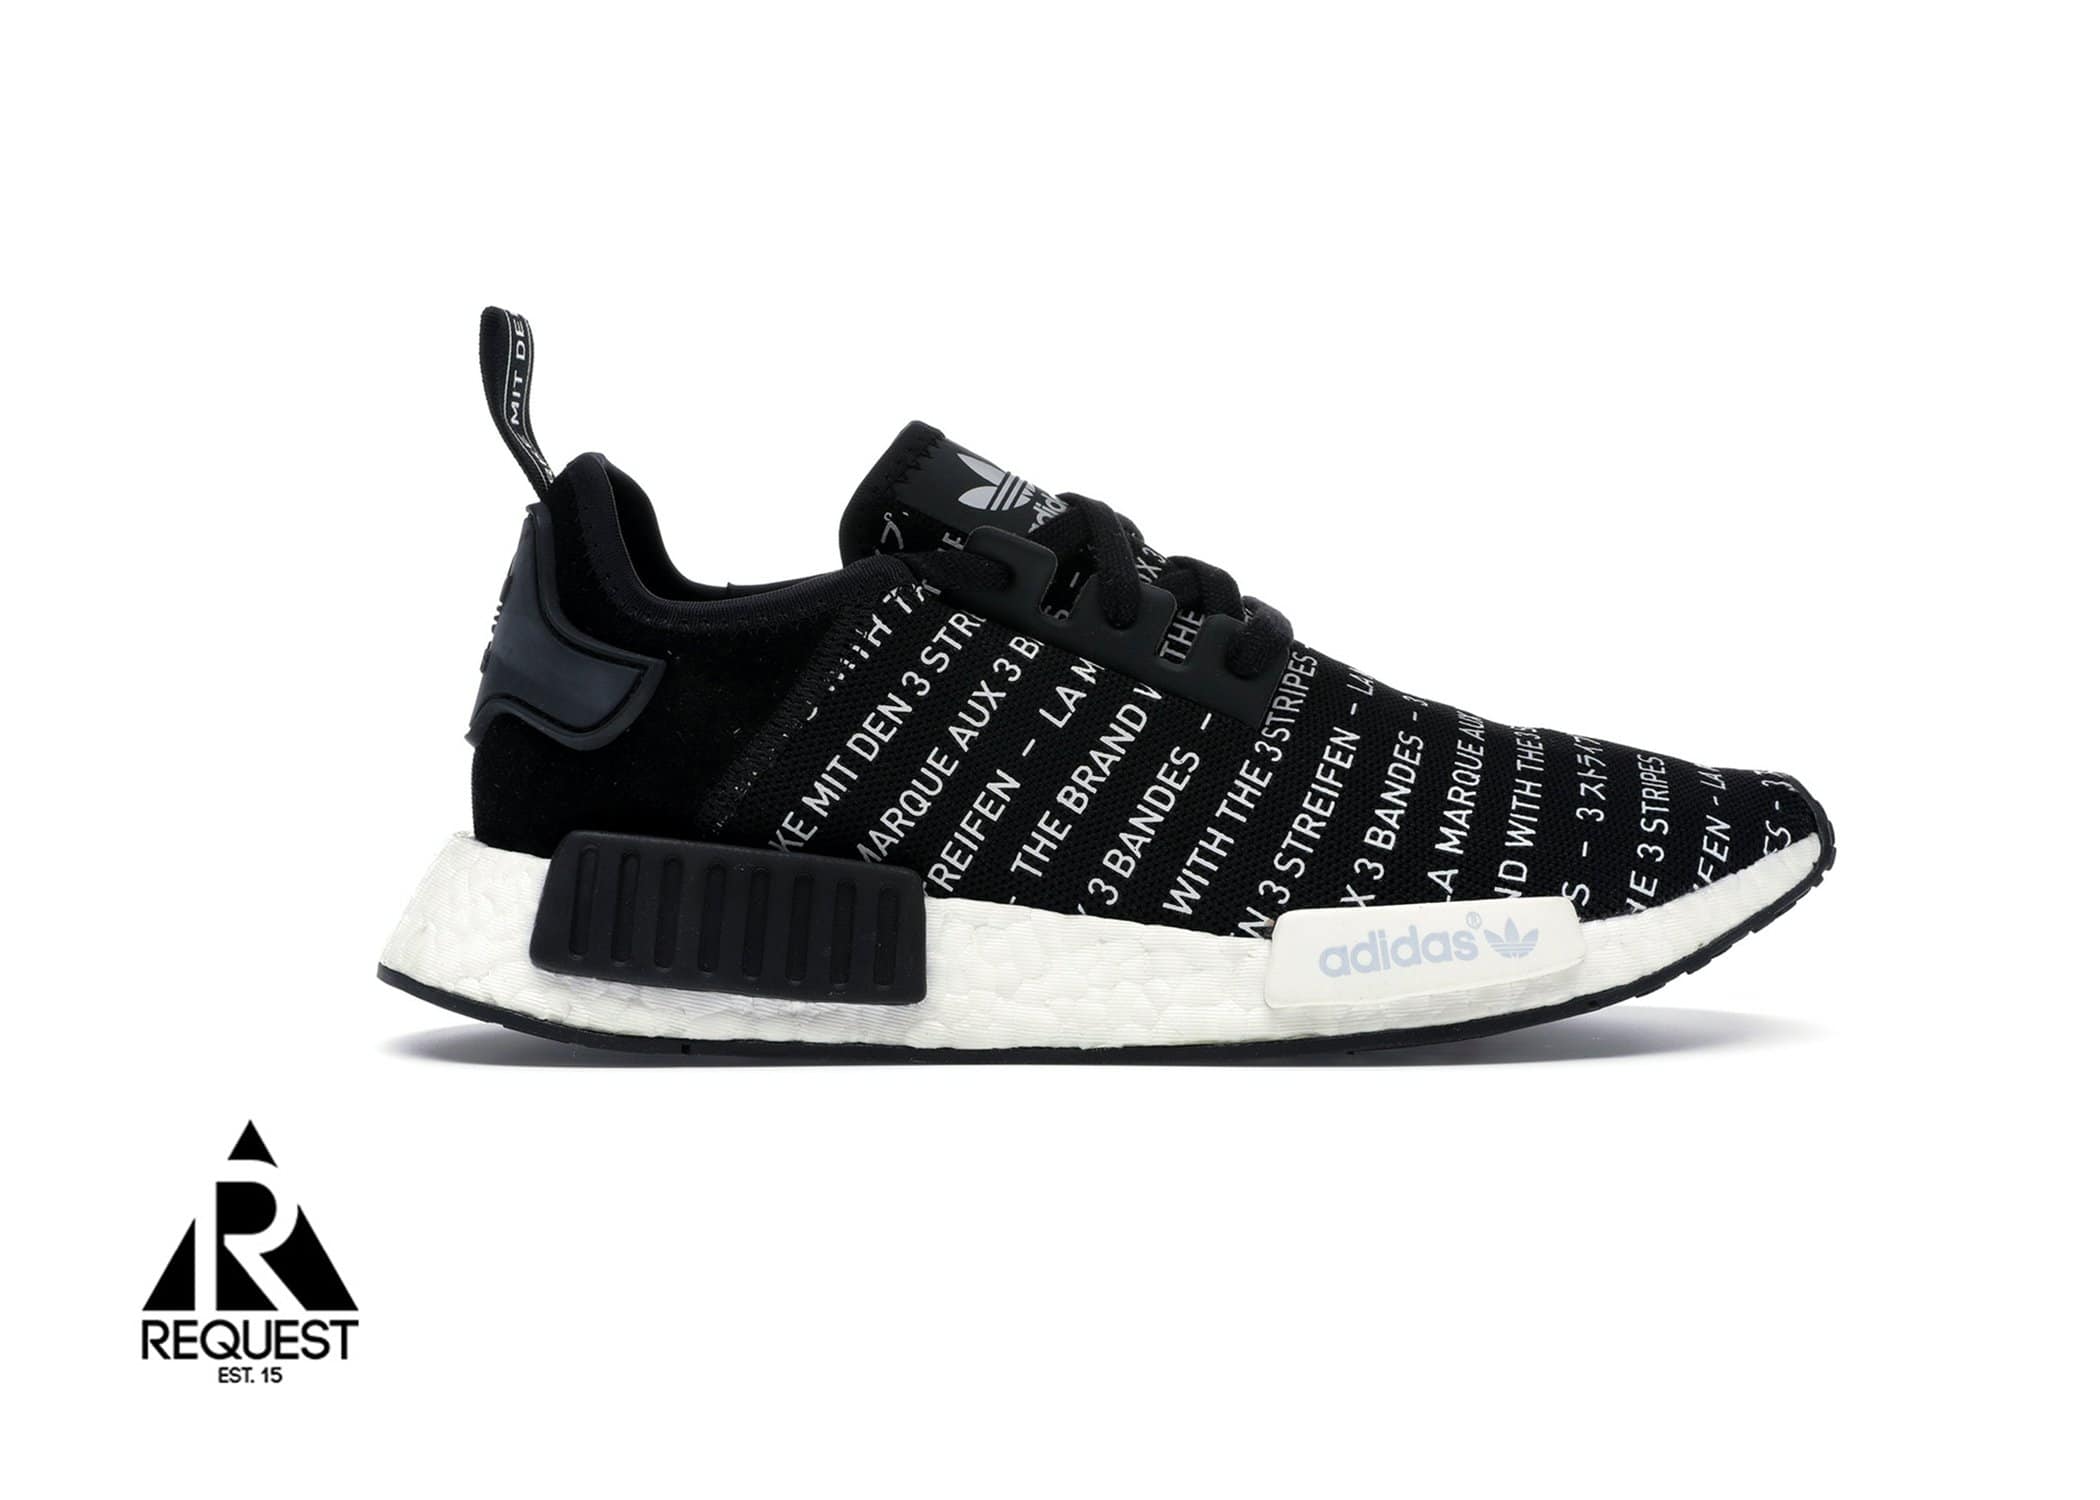 Adidas NMD R1 “Black Out”